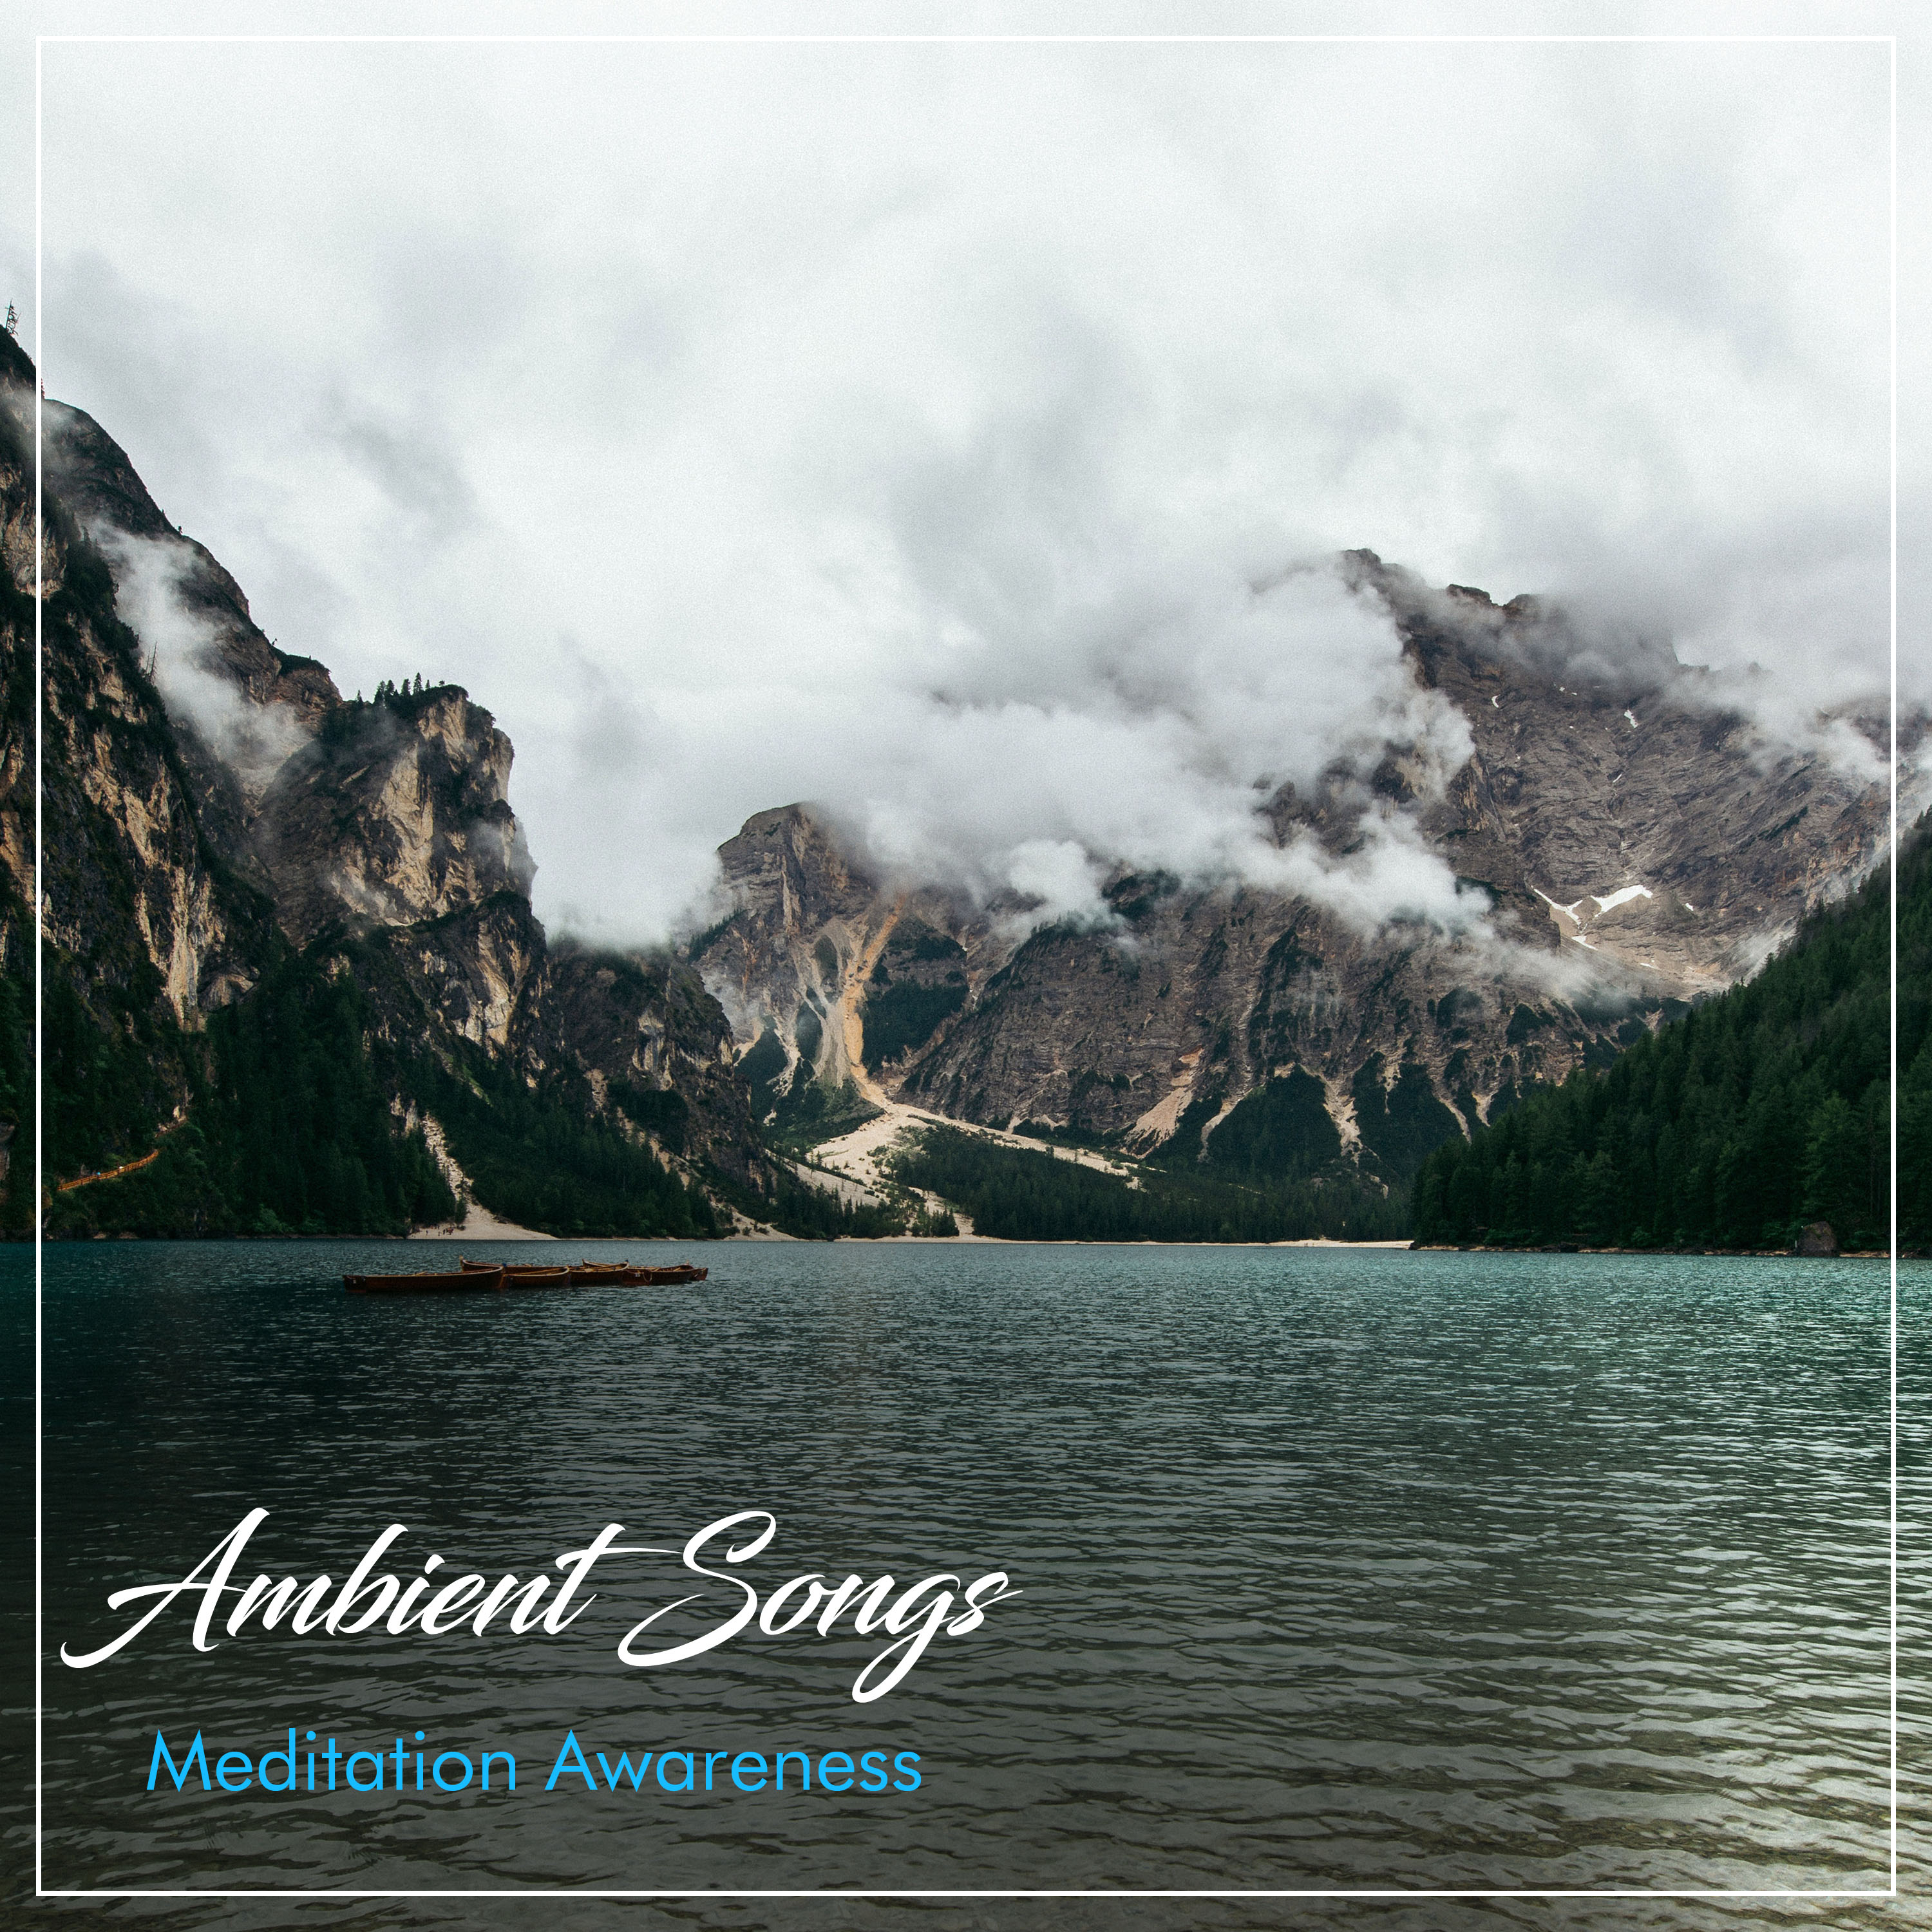 15 Ambient Songs - Meditation Awareness